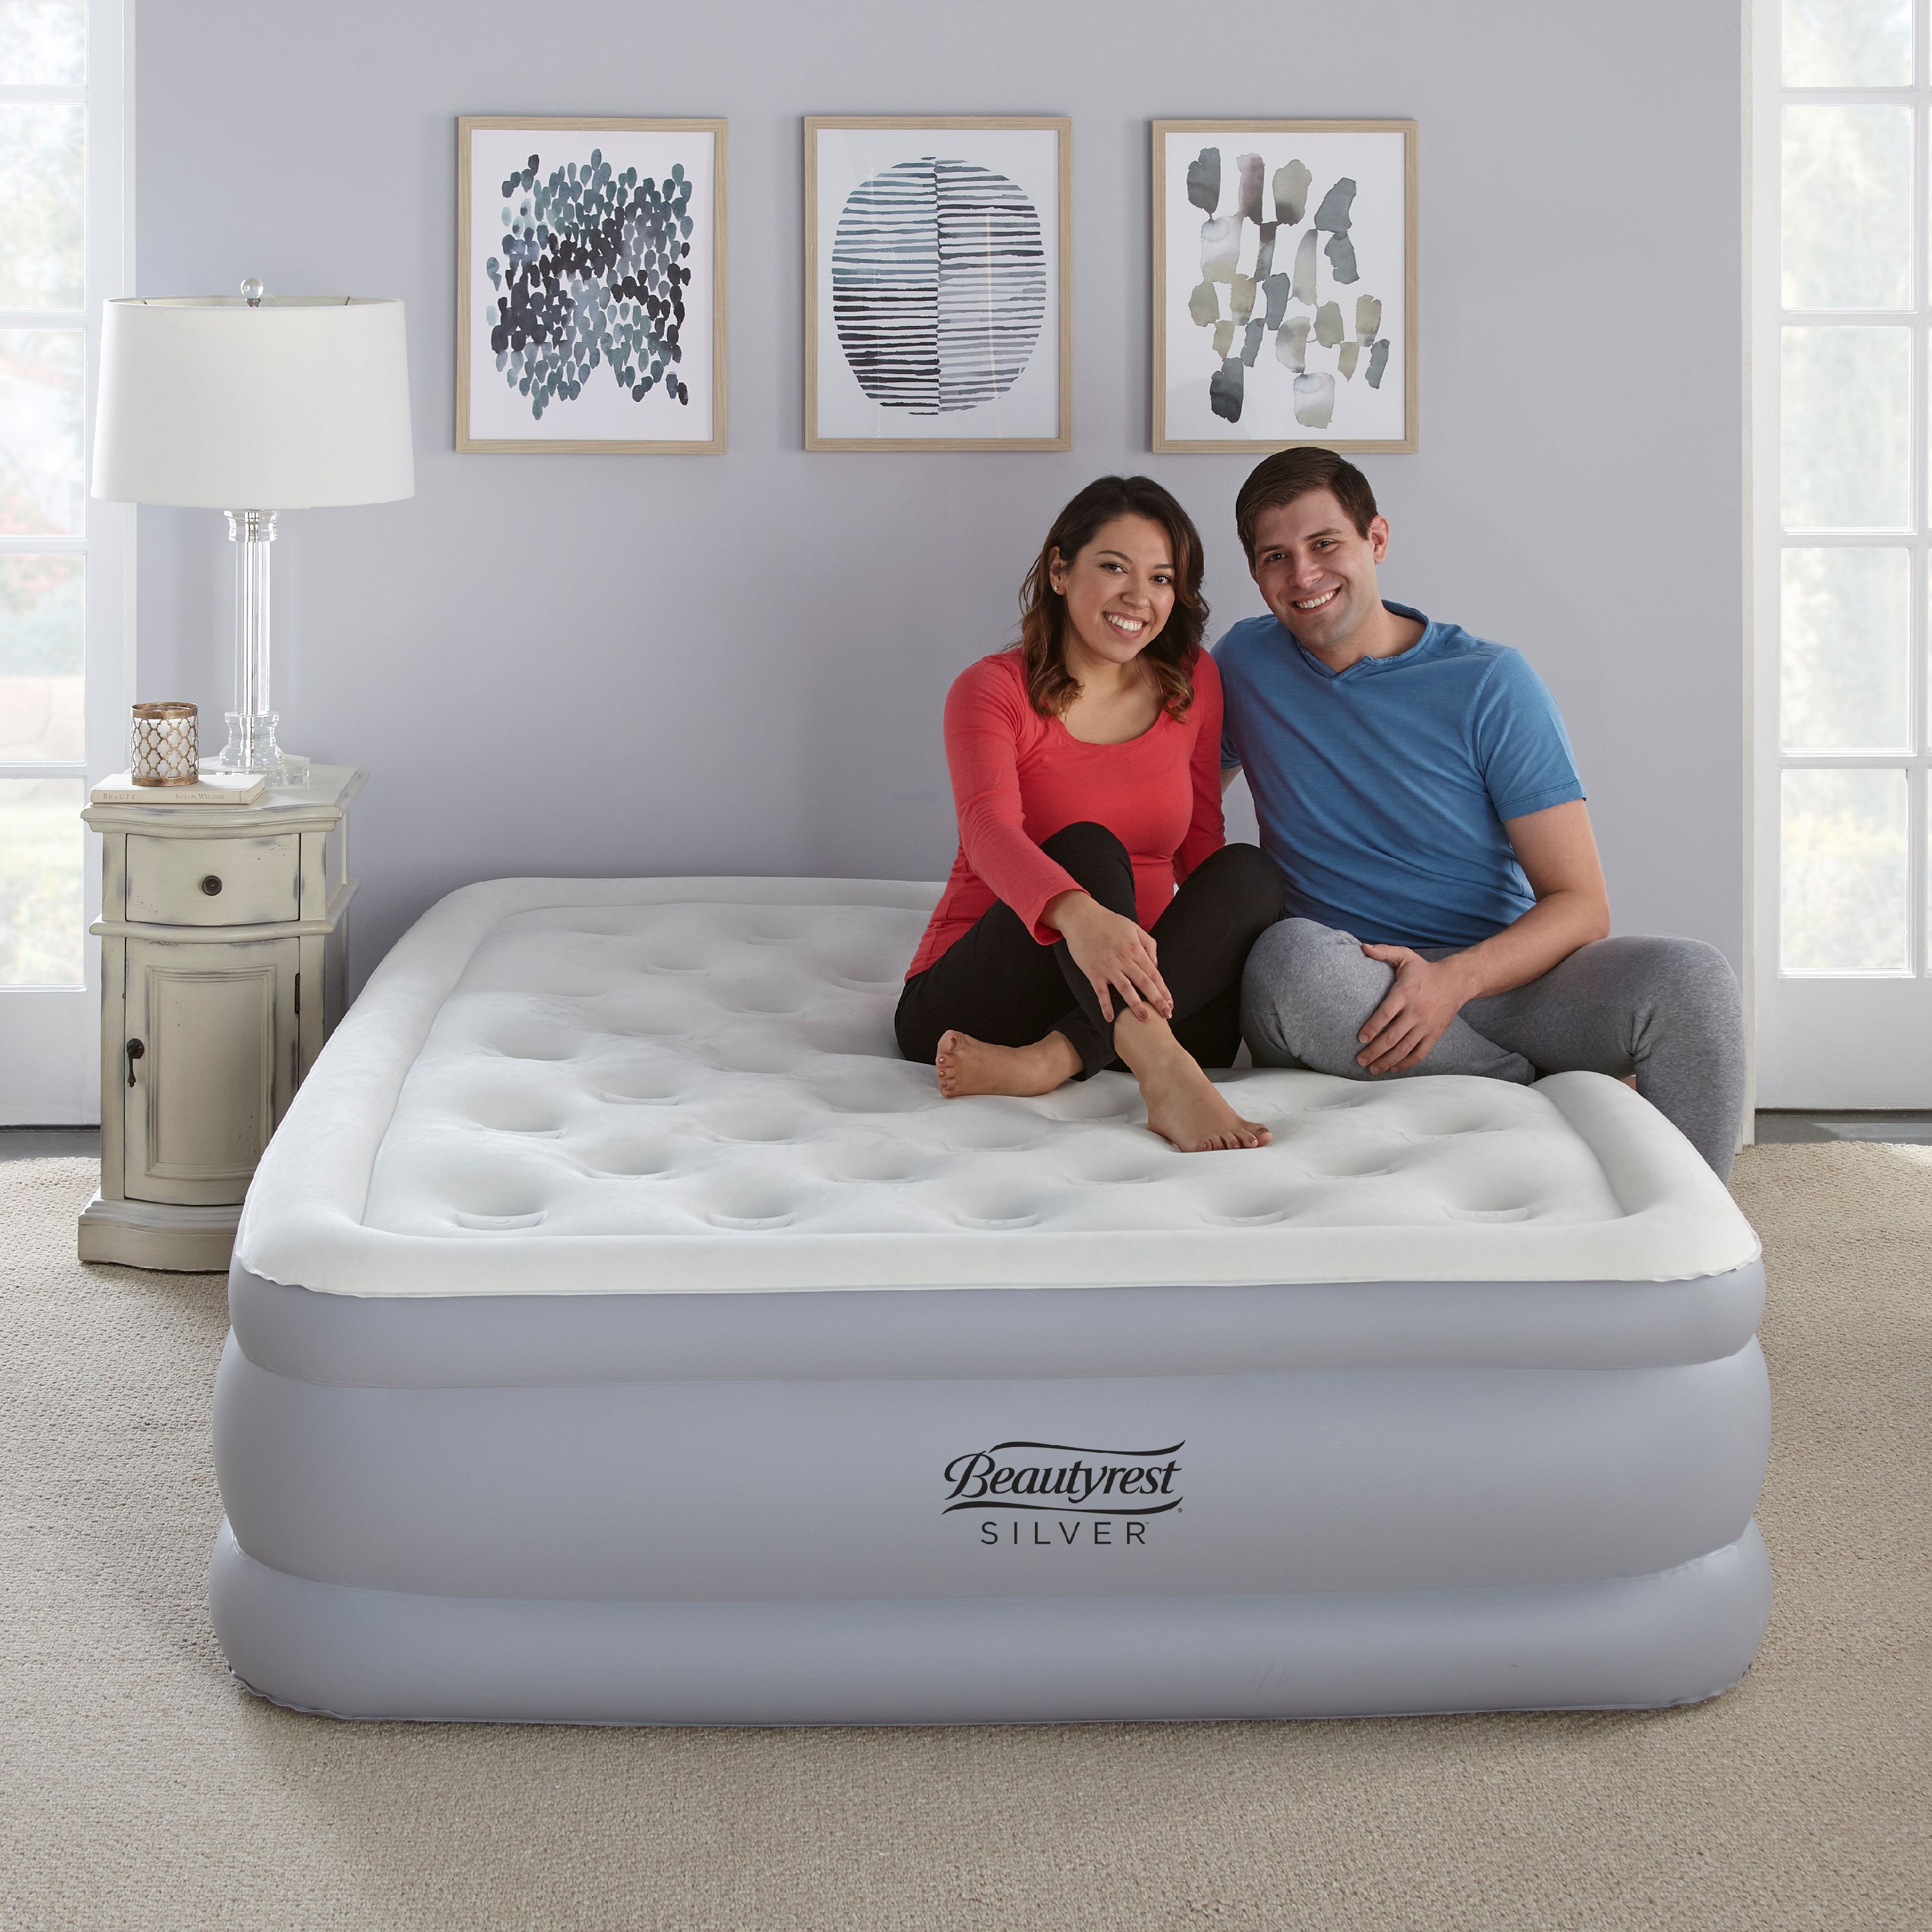 Beautyrest Everfirm 18 inch Queen Air Mattress with Built-in Pump - image 4 of 11